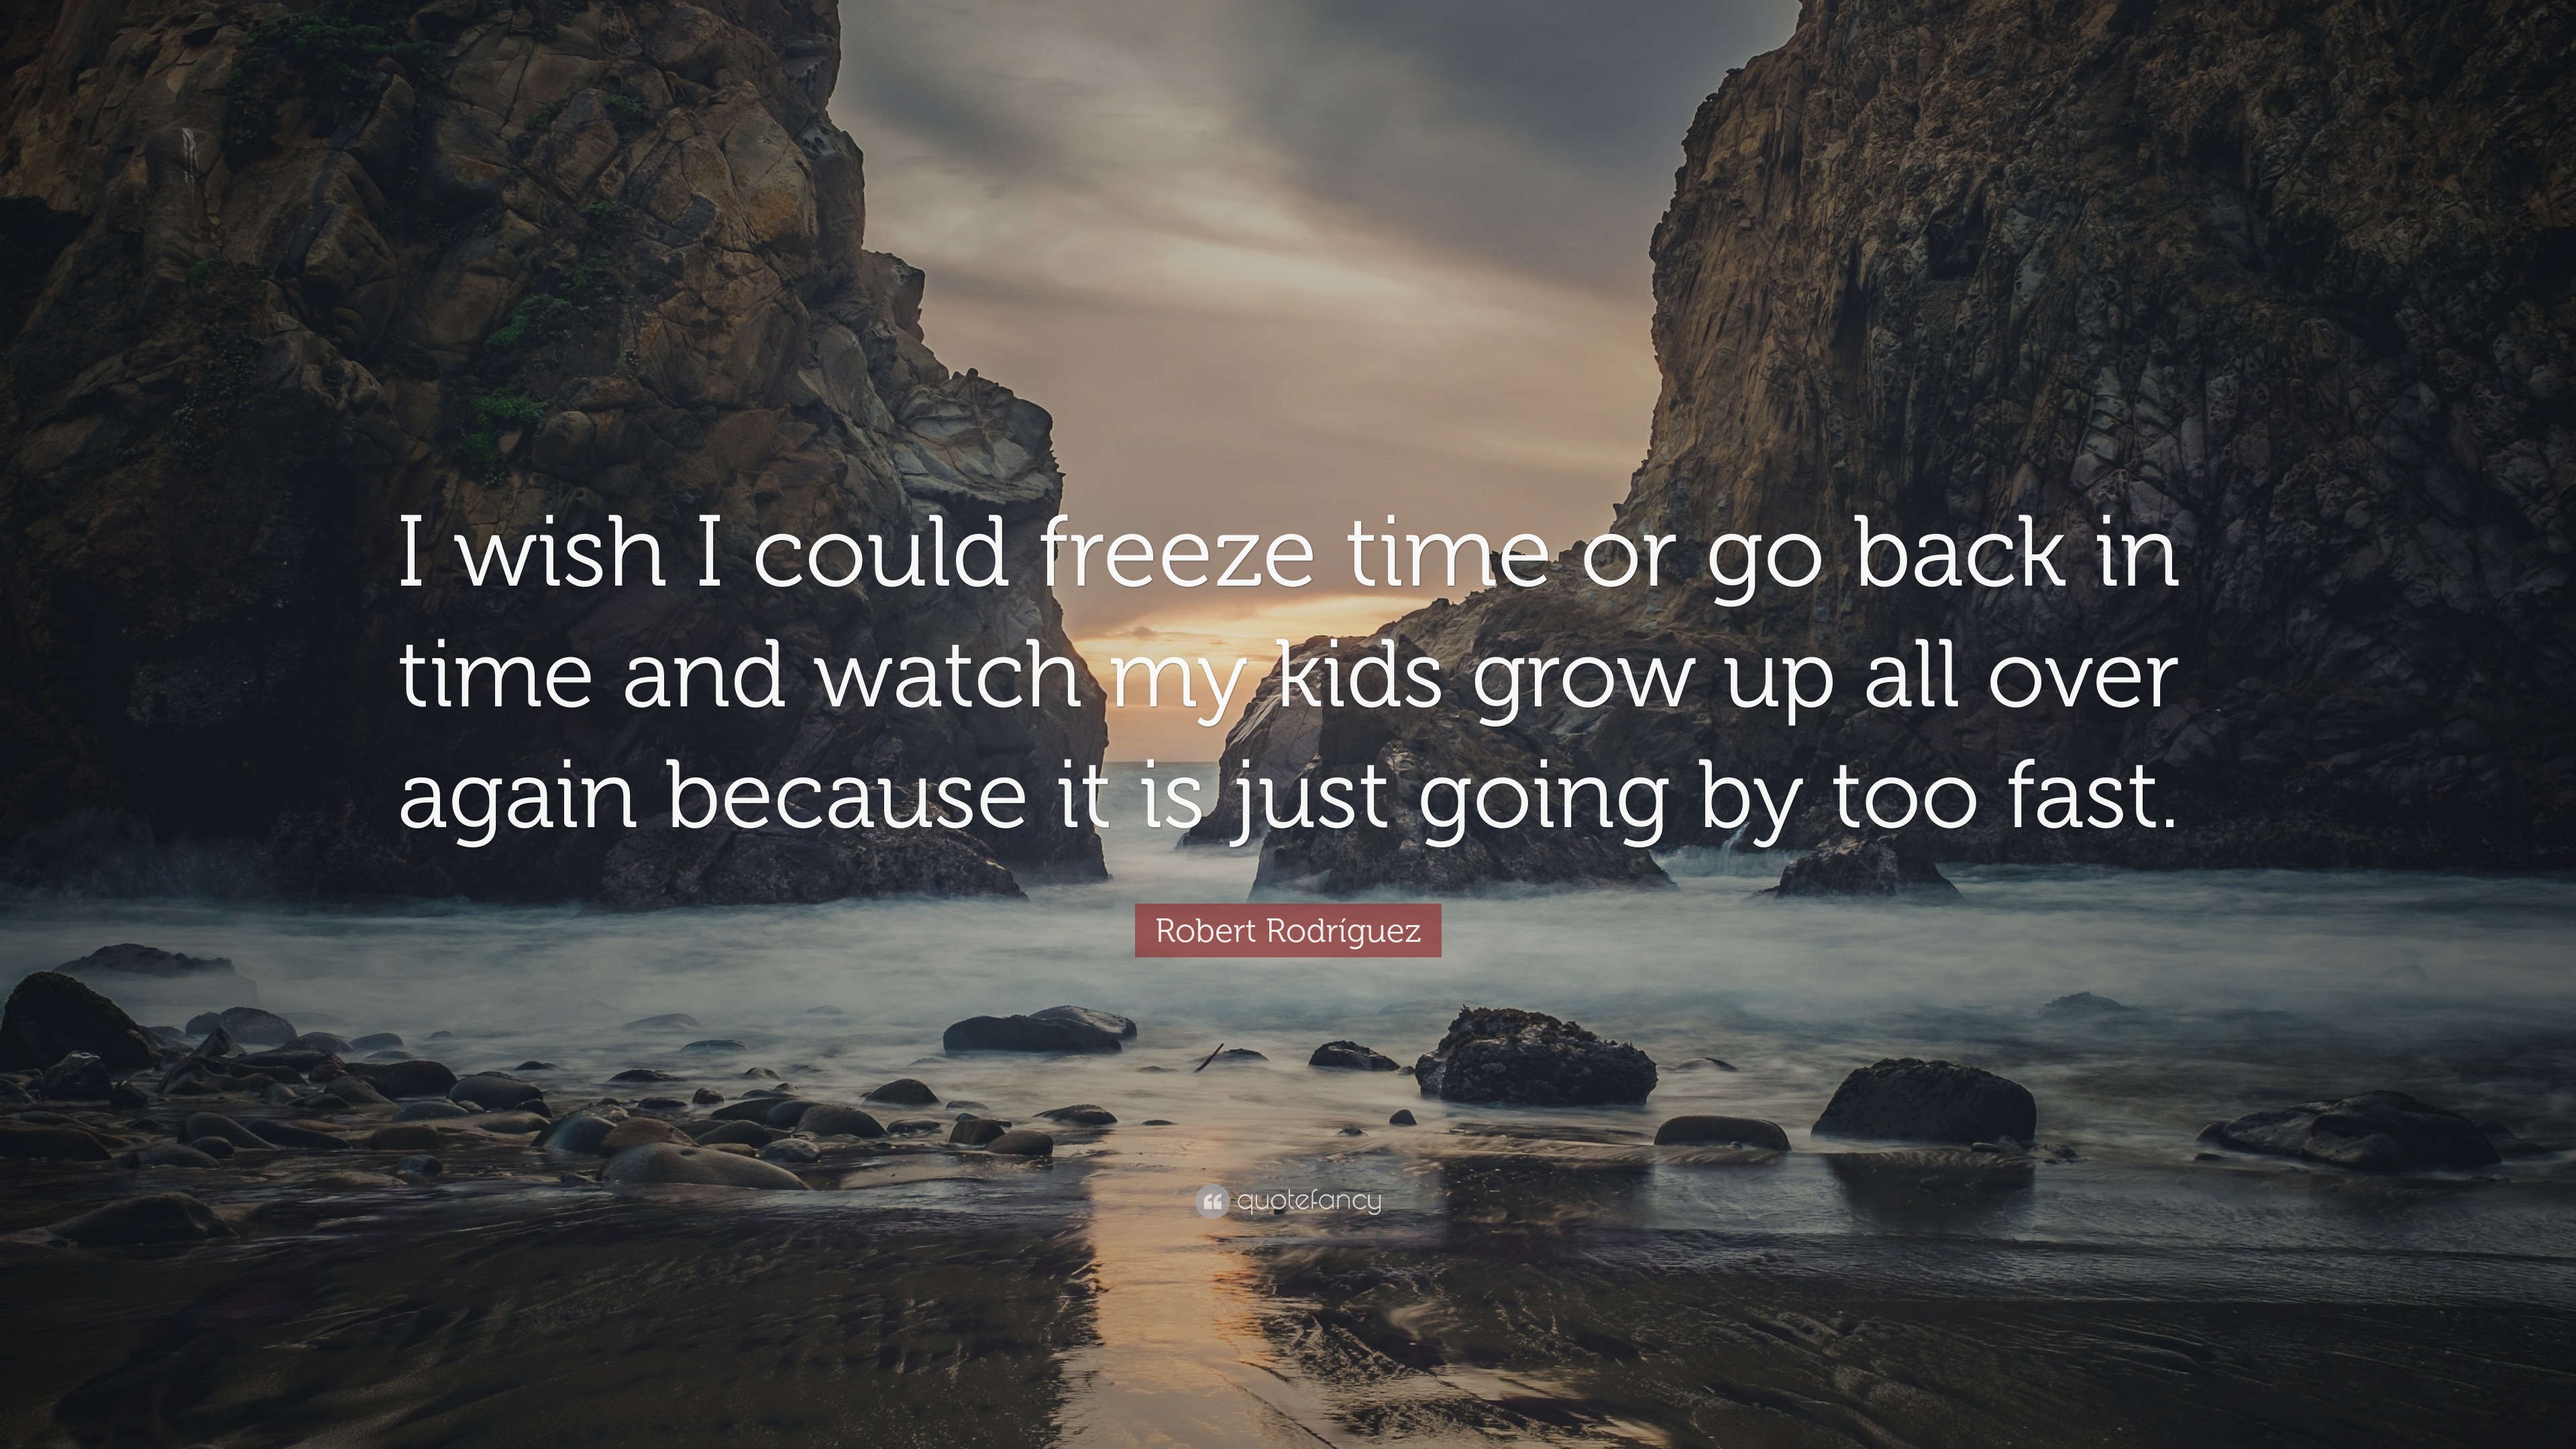 Robert Rodríguez Quote: wish could freeze time or go back time and watch my grow up all over again because it is just going by too f...”